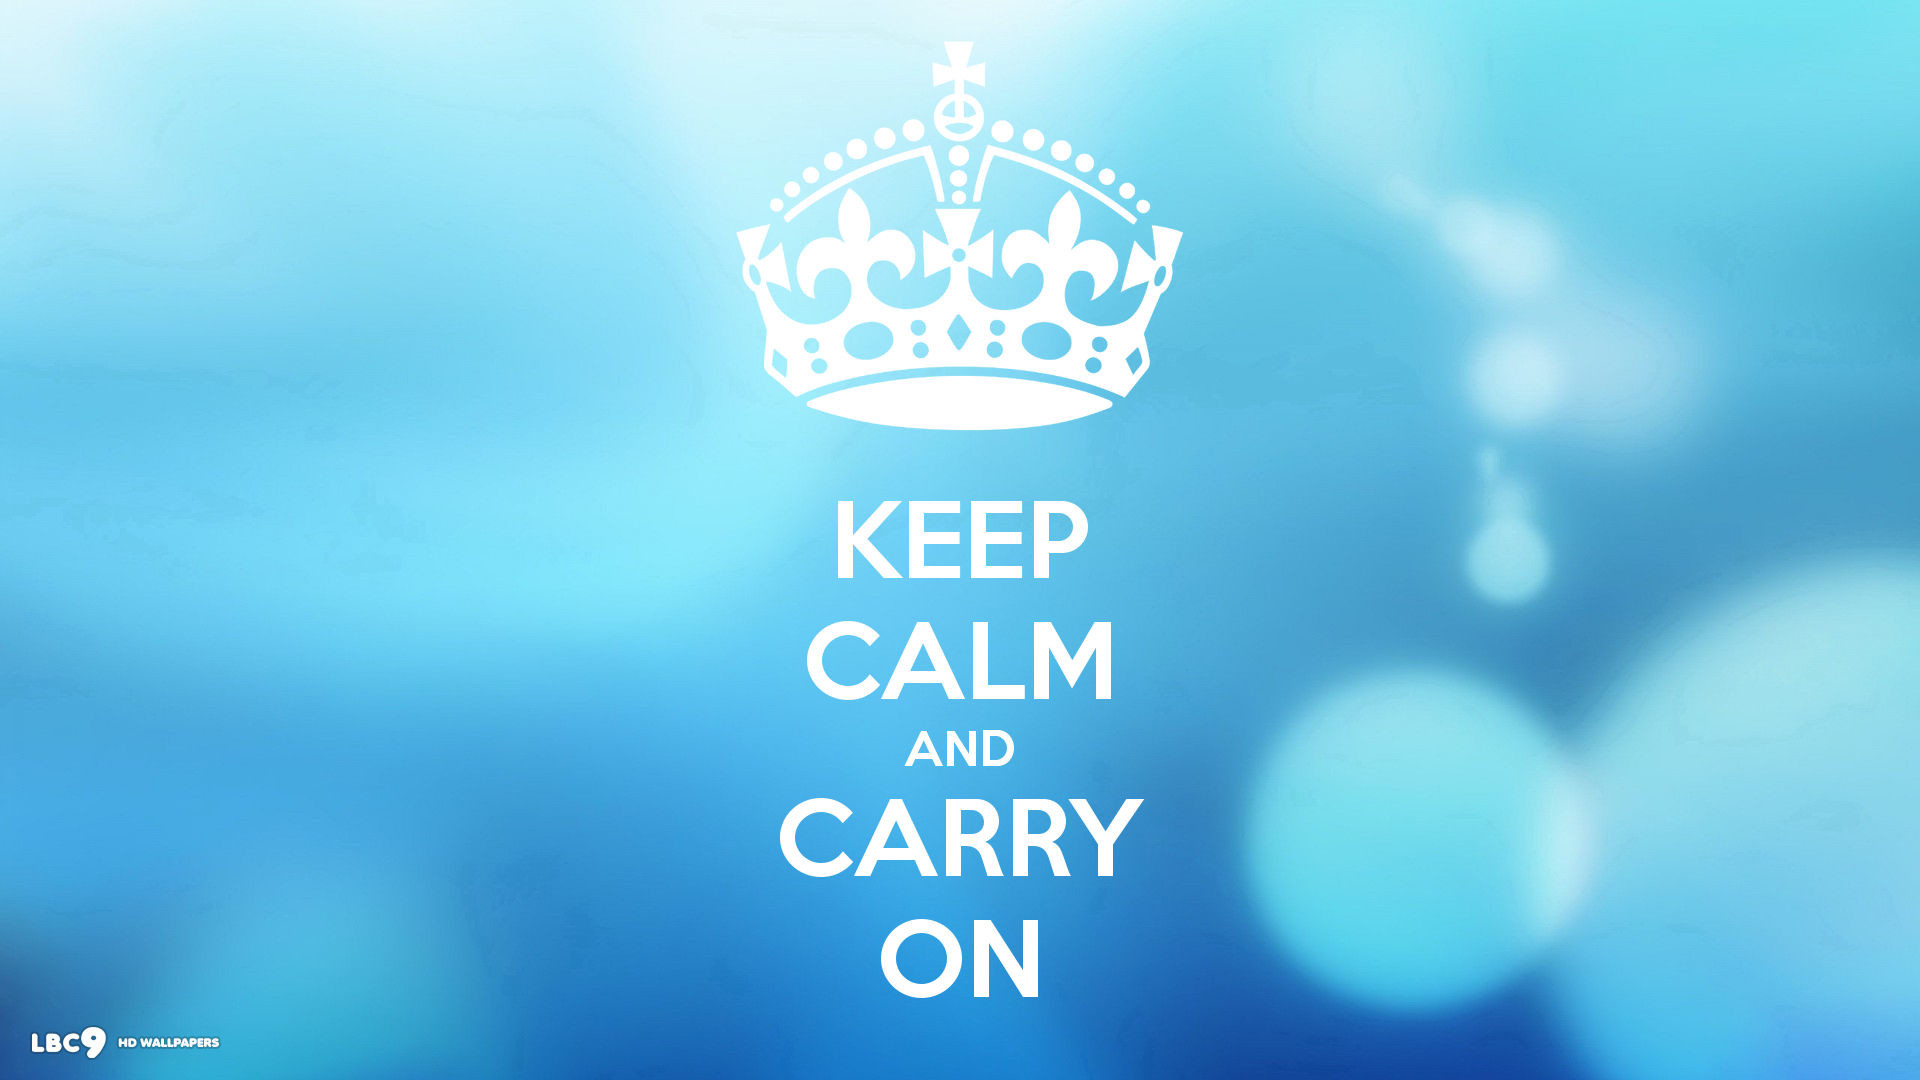 Keep Calm and Carry